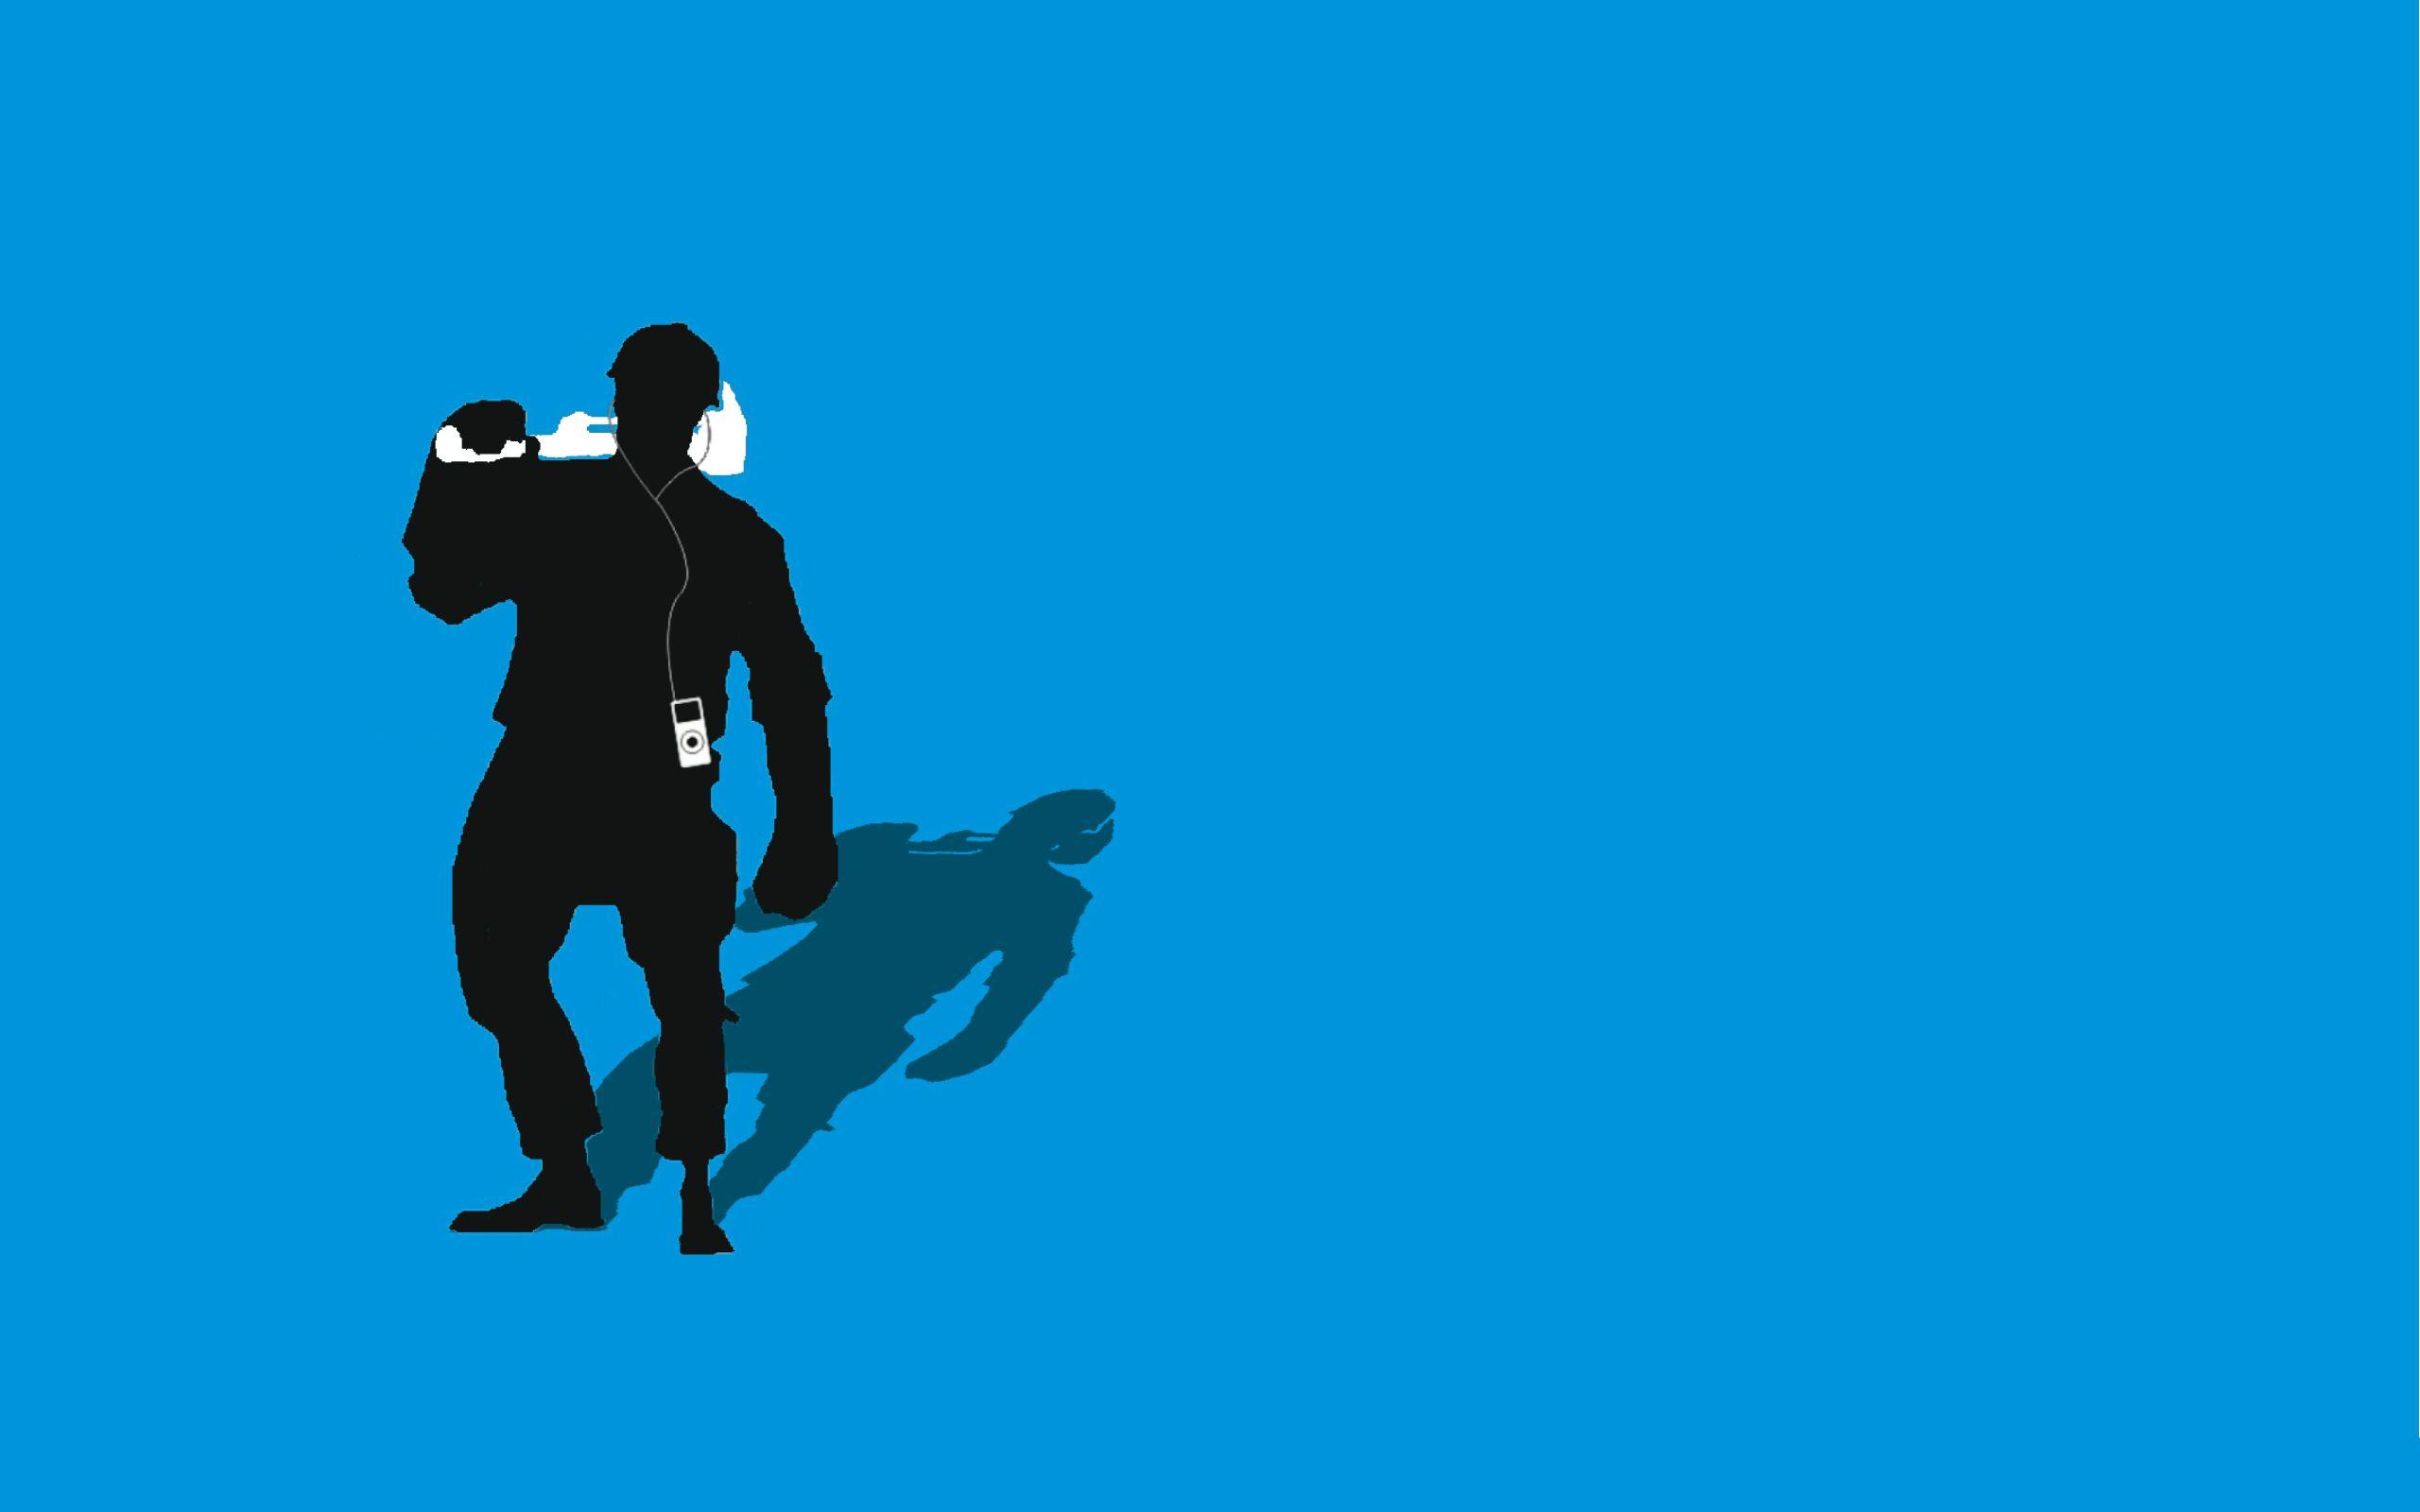 TF2 Blue Engineer Silhouette iPodEarbuds 2560x1600 by cwegrecki on